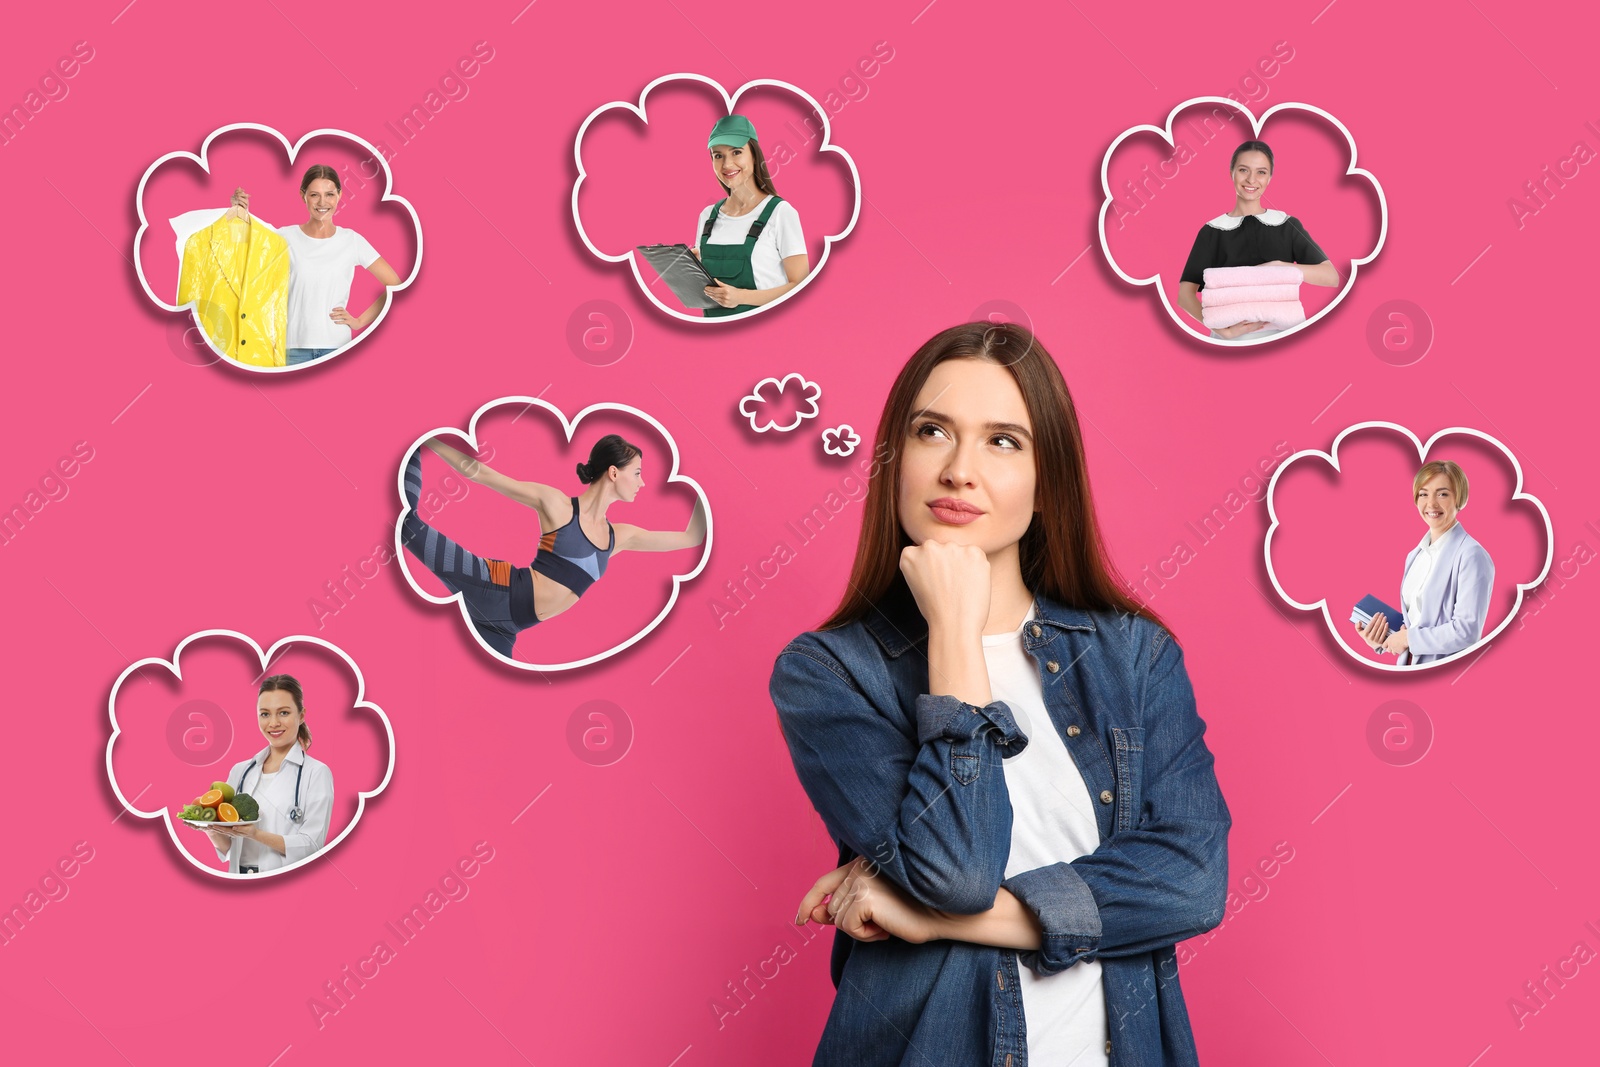 Image of Thoughtful woman choosing probable profession on pink background